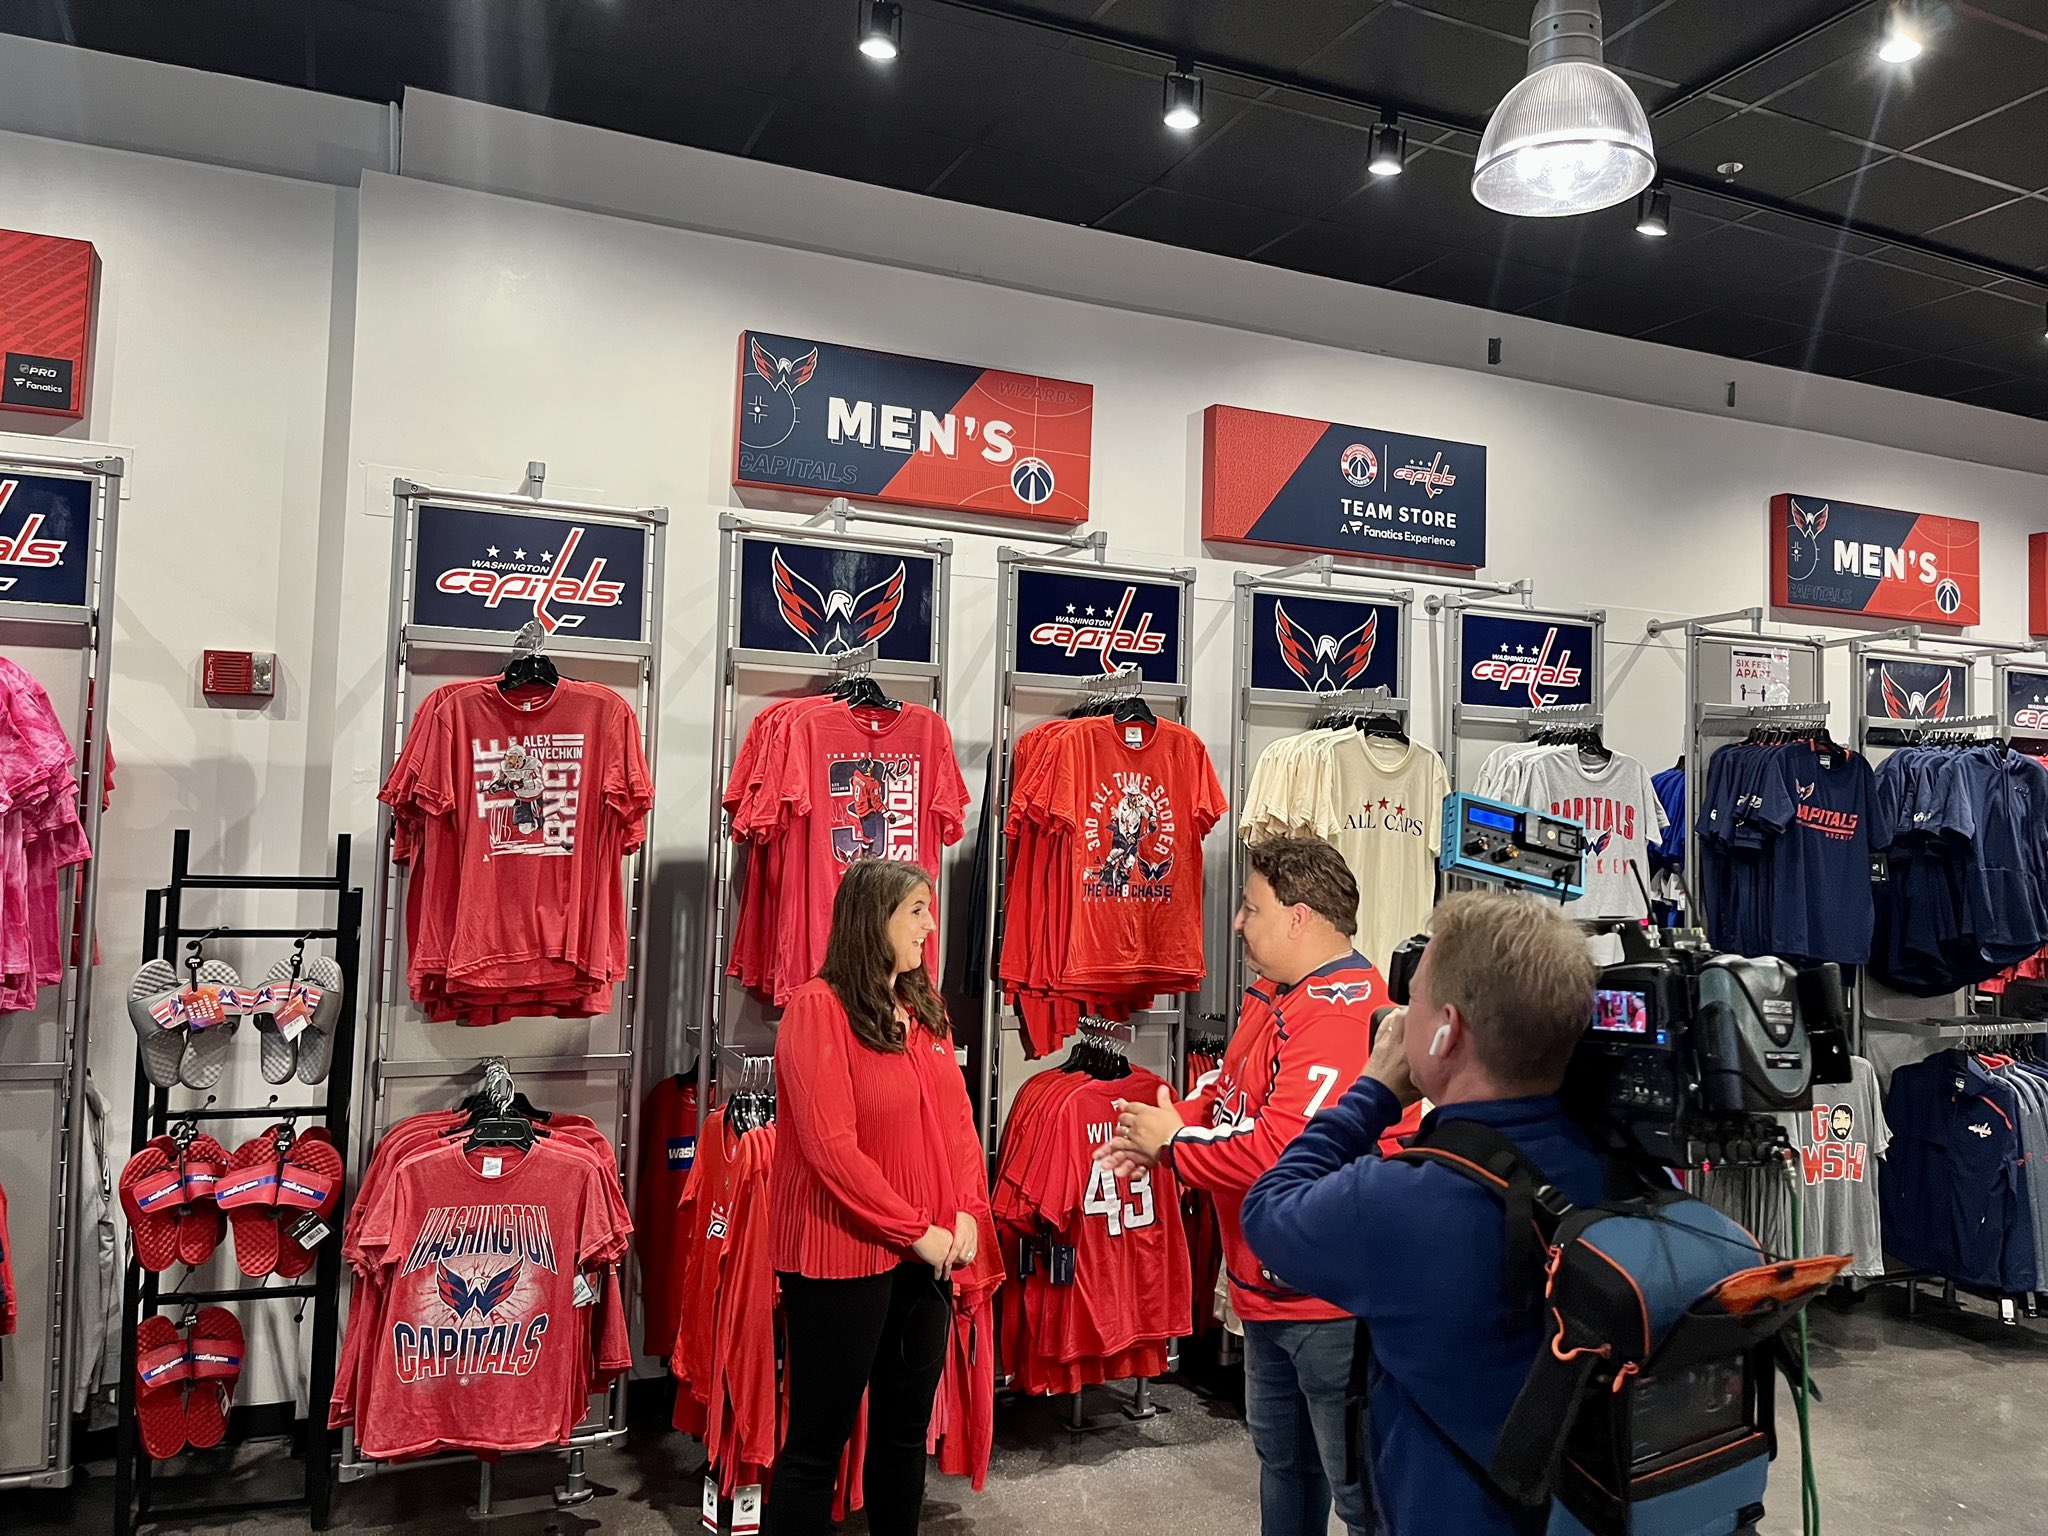 Team Store Capital One Arena (@teamshopatcoa) • Instagram photos and videos